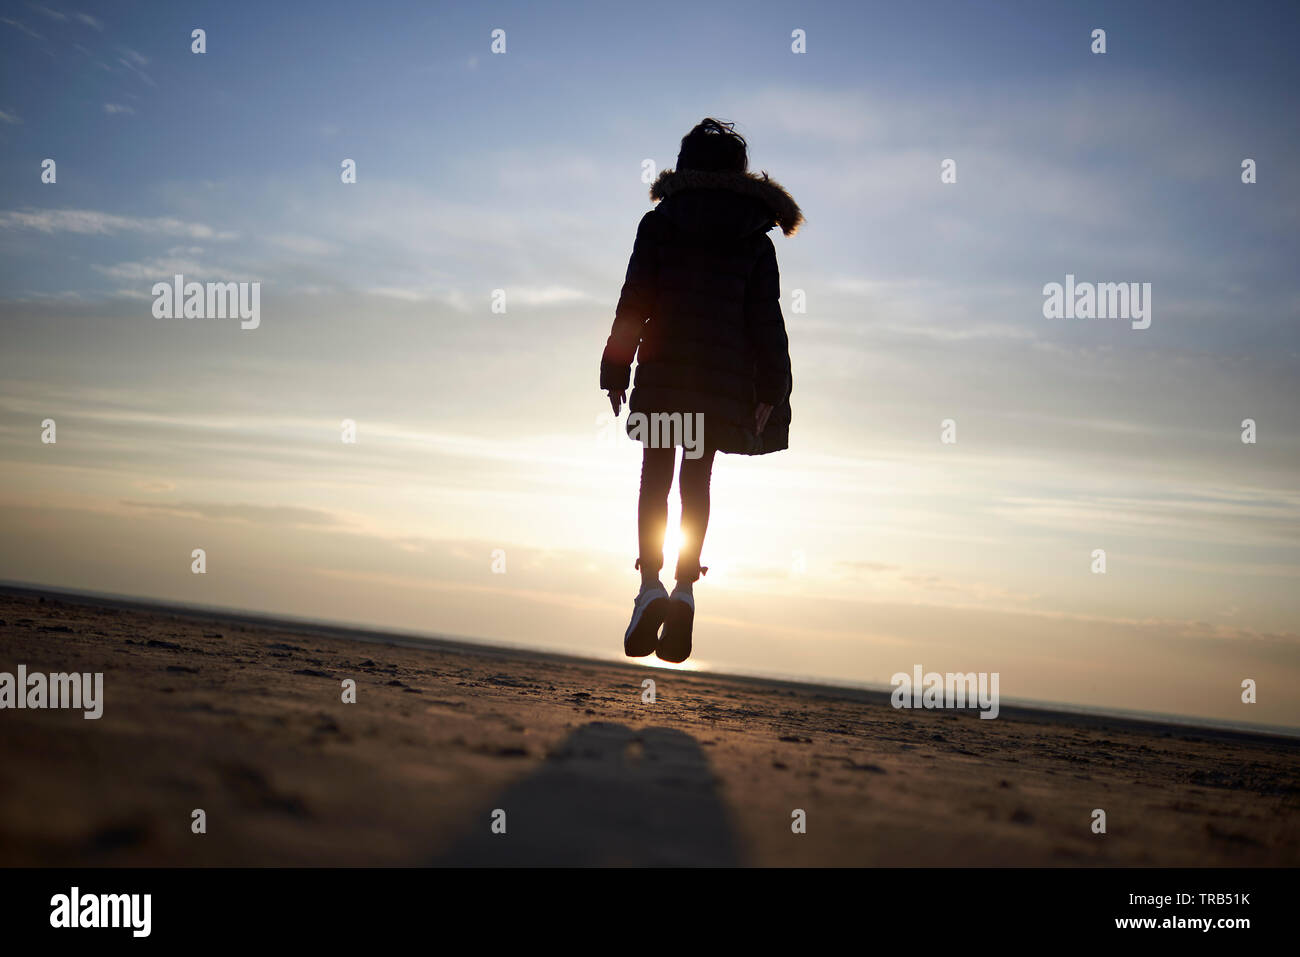 Silhouette of a young girl jumping high in the air in a barren beach landscape making it look as if she is weightless and floating in the midair Stock Photo